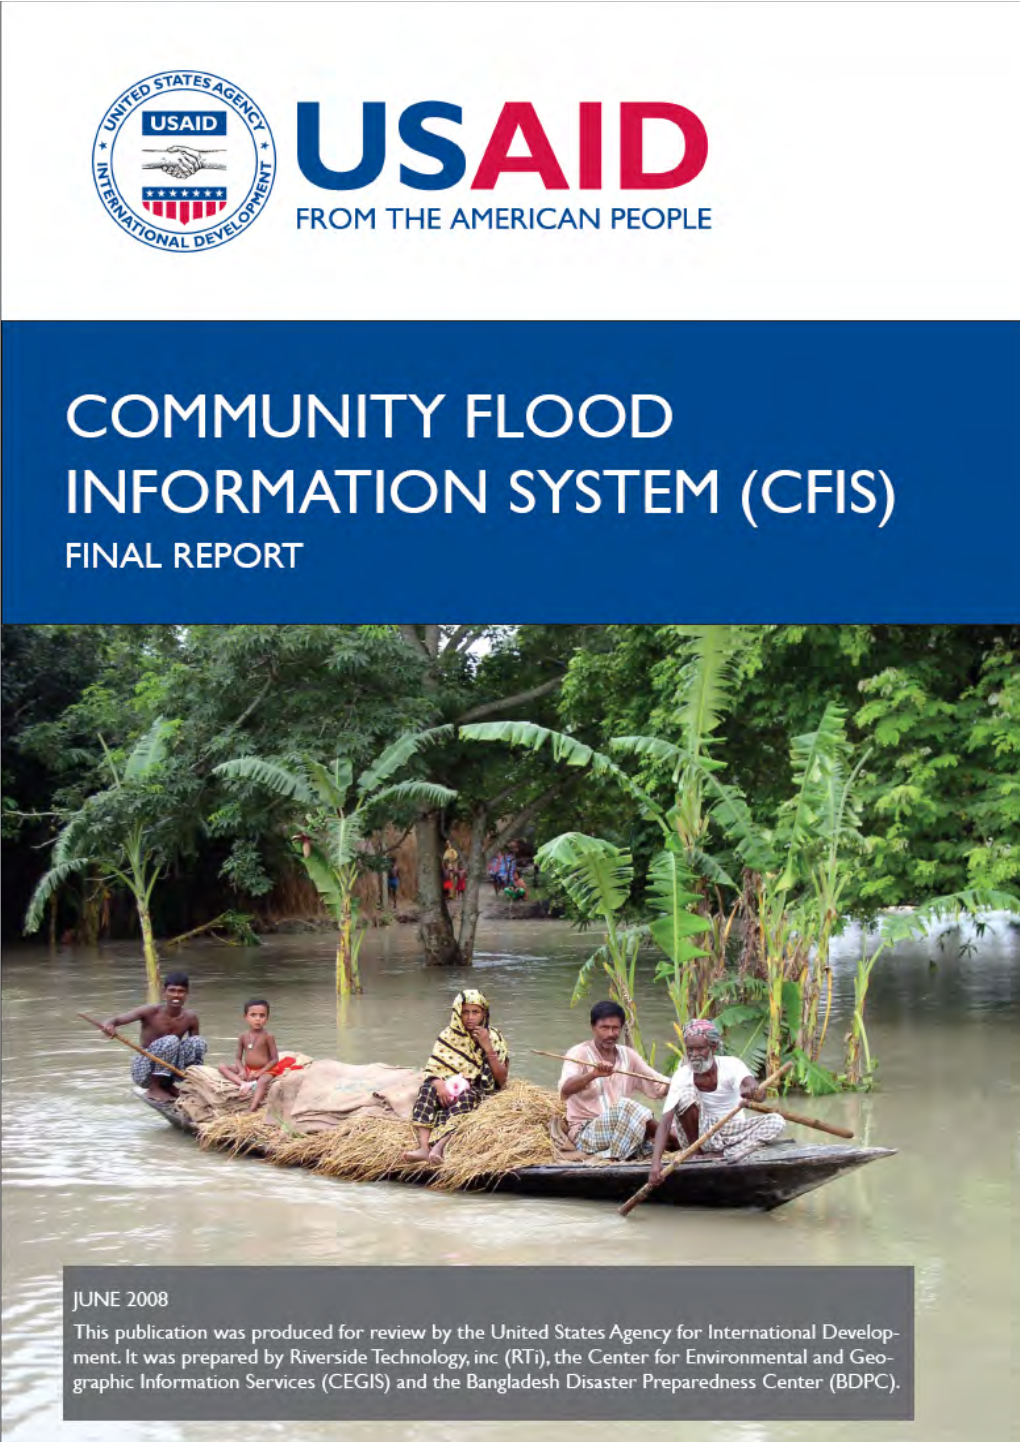 2 Roles and Responsibilities of Key Agencies Involved in Flood Management in Bangladesh